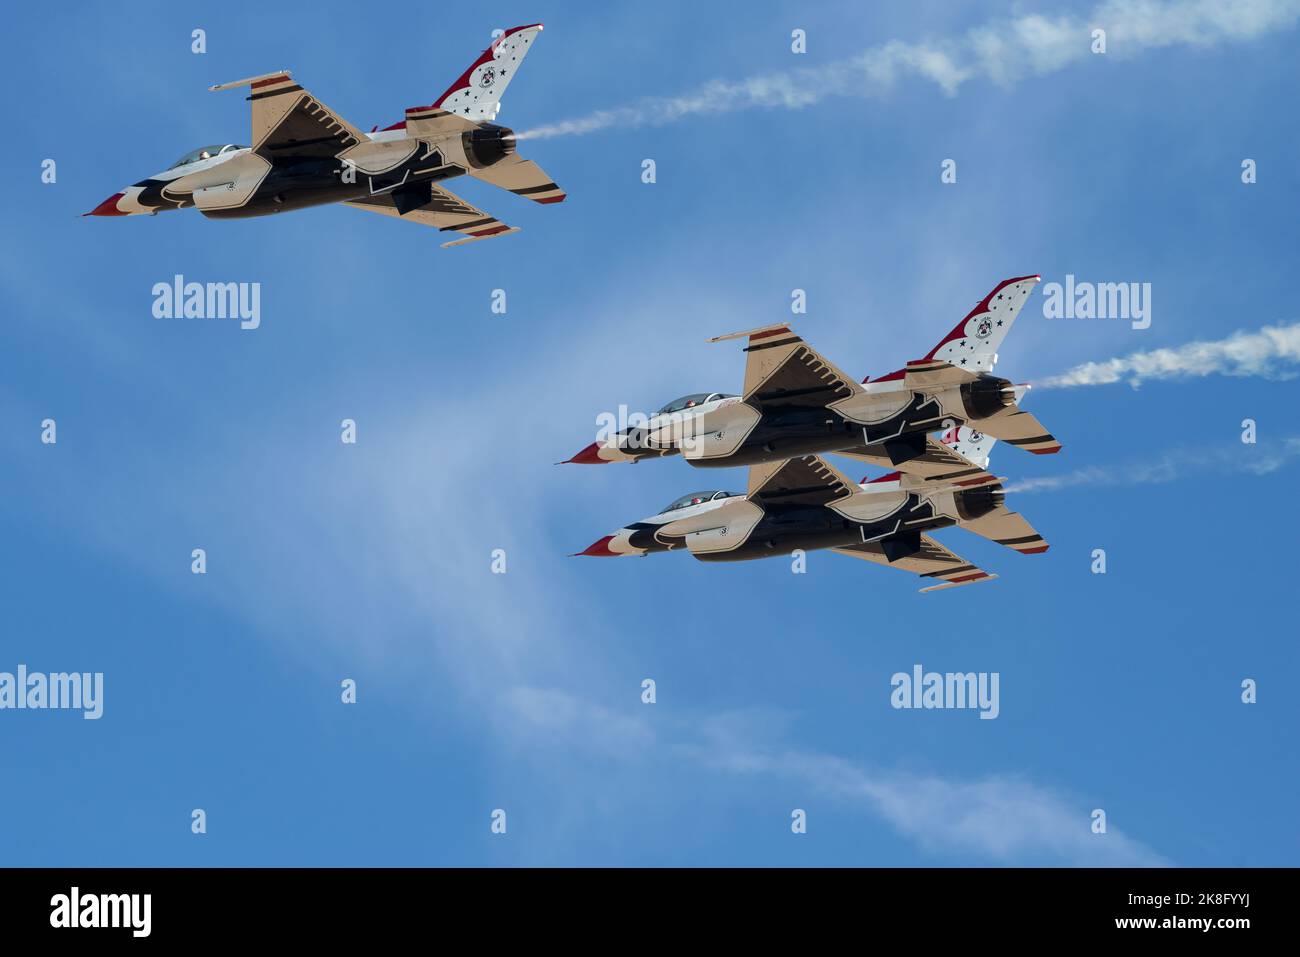 Mojave Desert, California, United States - October 16, 2022: USAF Thunderbirds shown flying in formation over Edwards AFB in California. Stock Photo